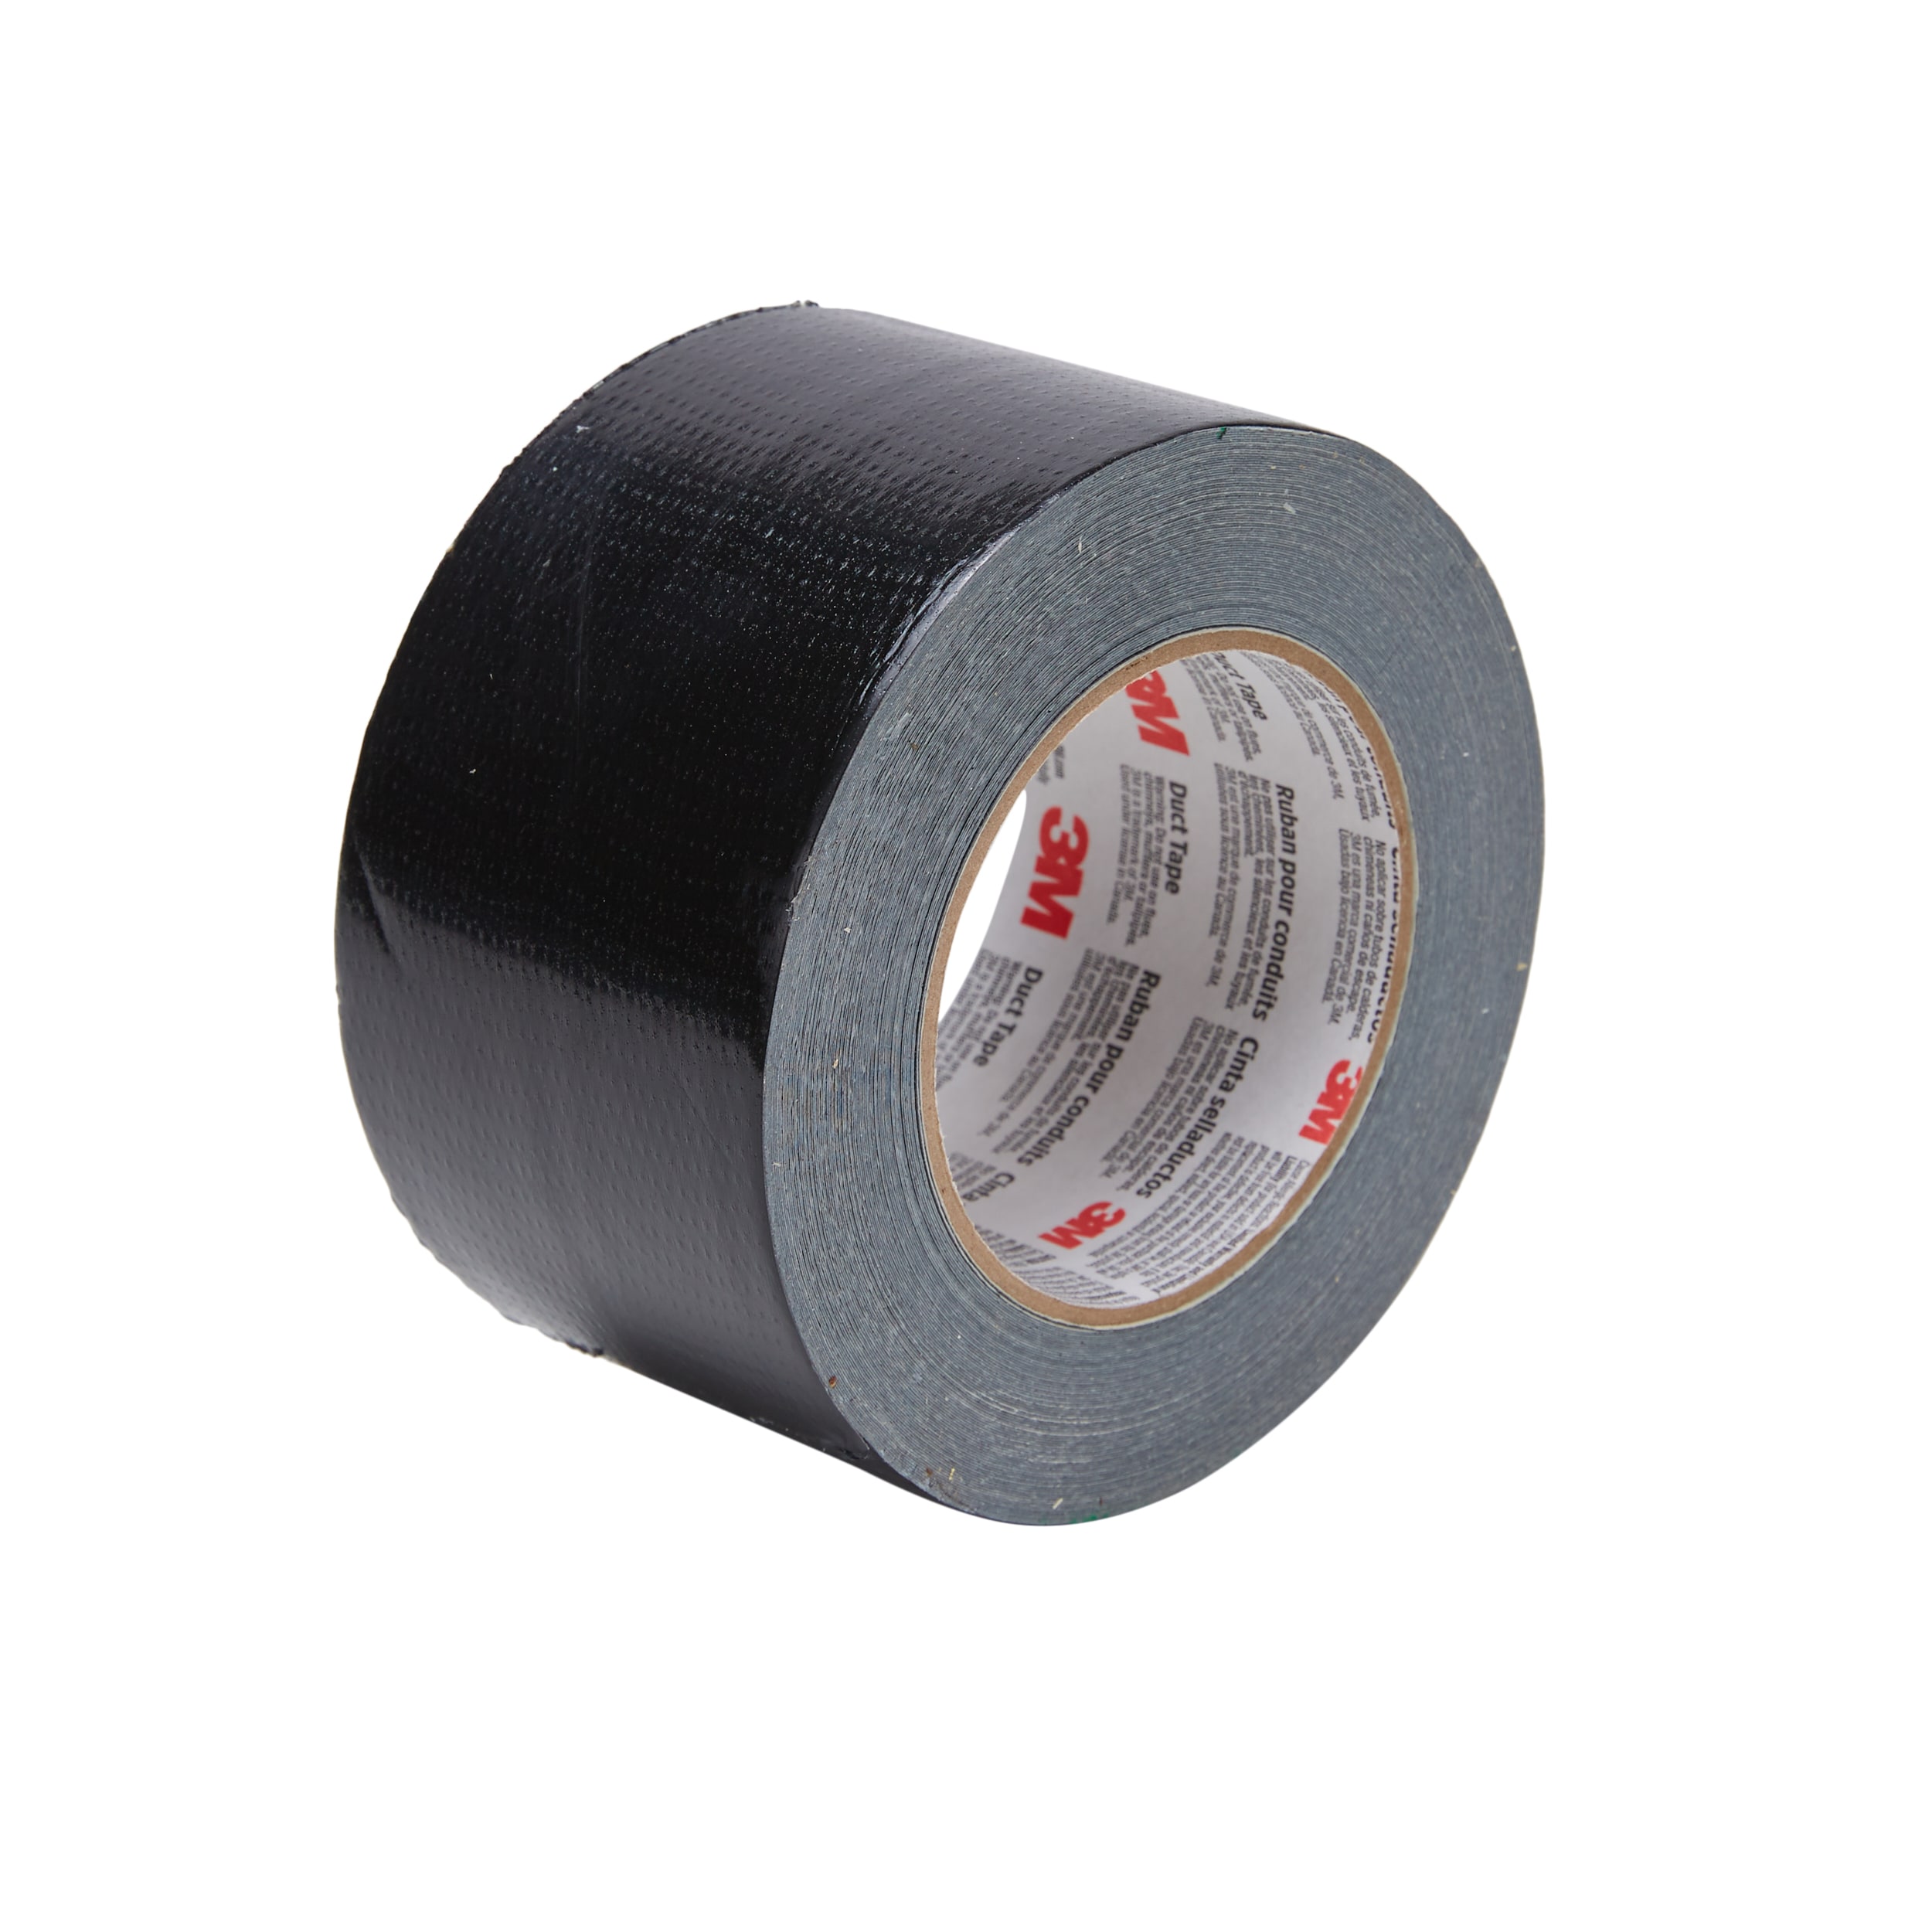 Baluue 4 Rolls Duct Tape Repair Tape Heavy Duty Carpet Tape Tape Duct Cloth  Tape Carpet Tape for Hardwood Floors Rug Tape for Carpet Liner Stitching